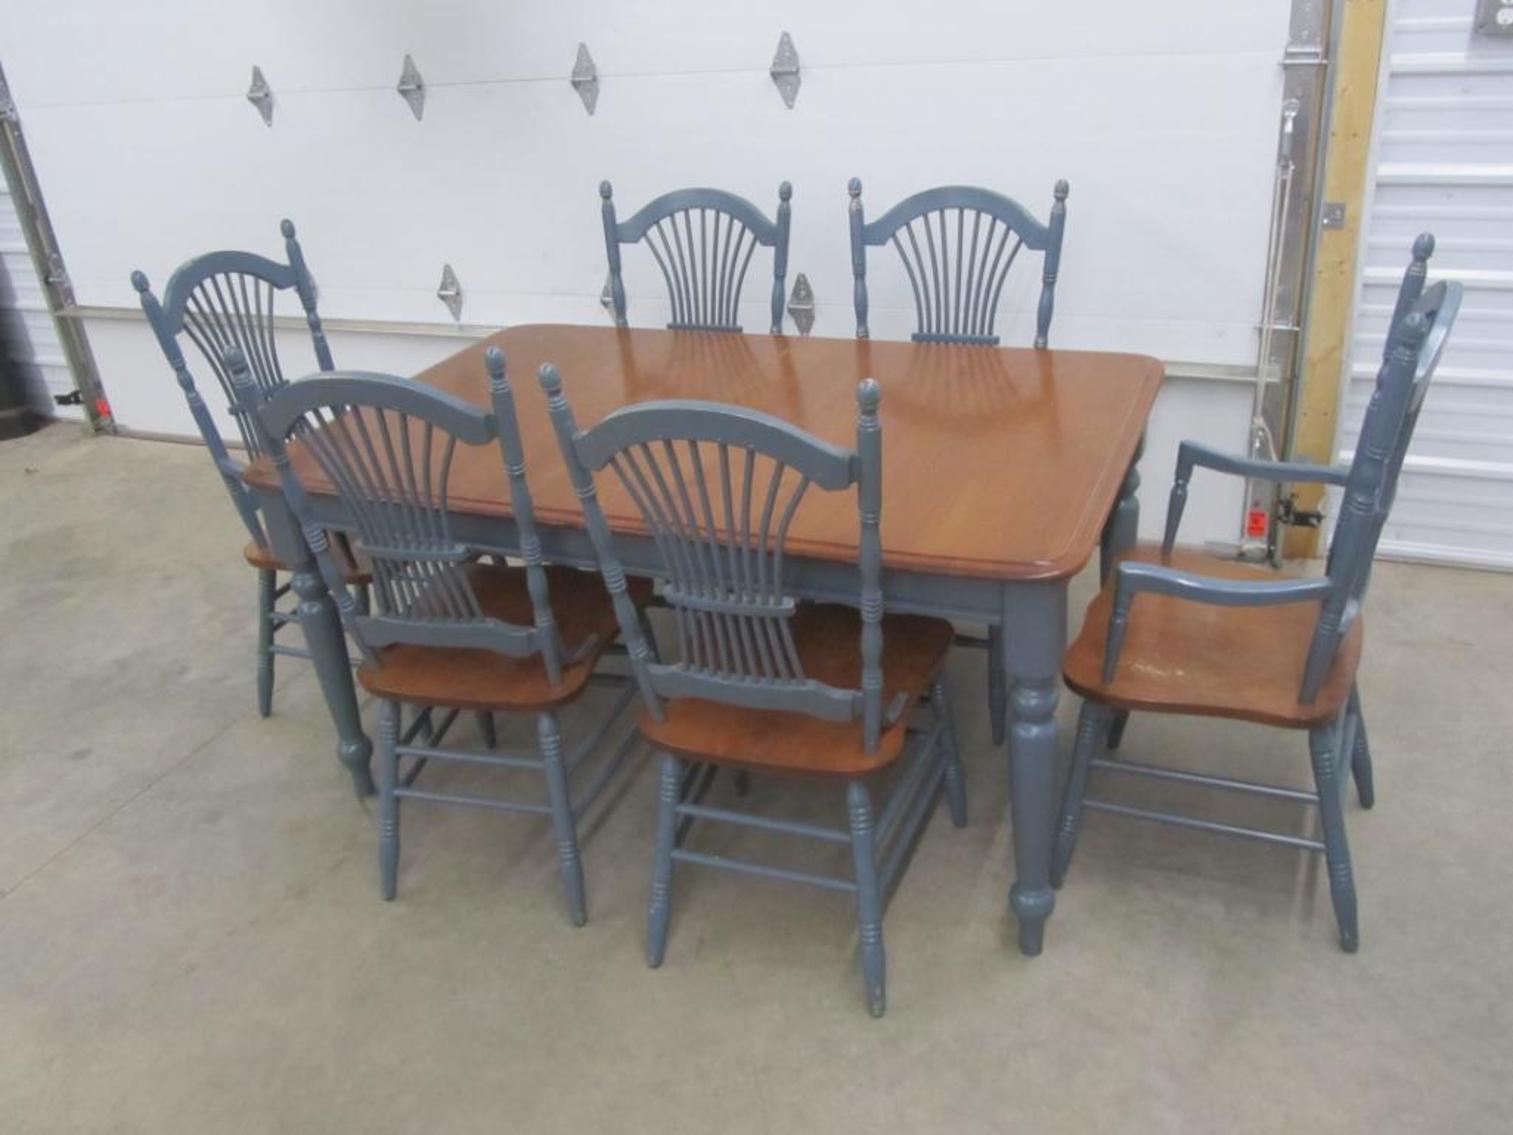 Ideal Corners Late October Consignment Auction